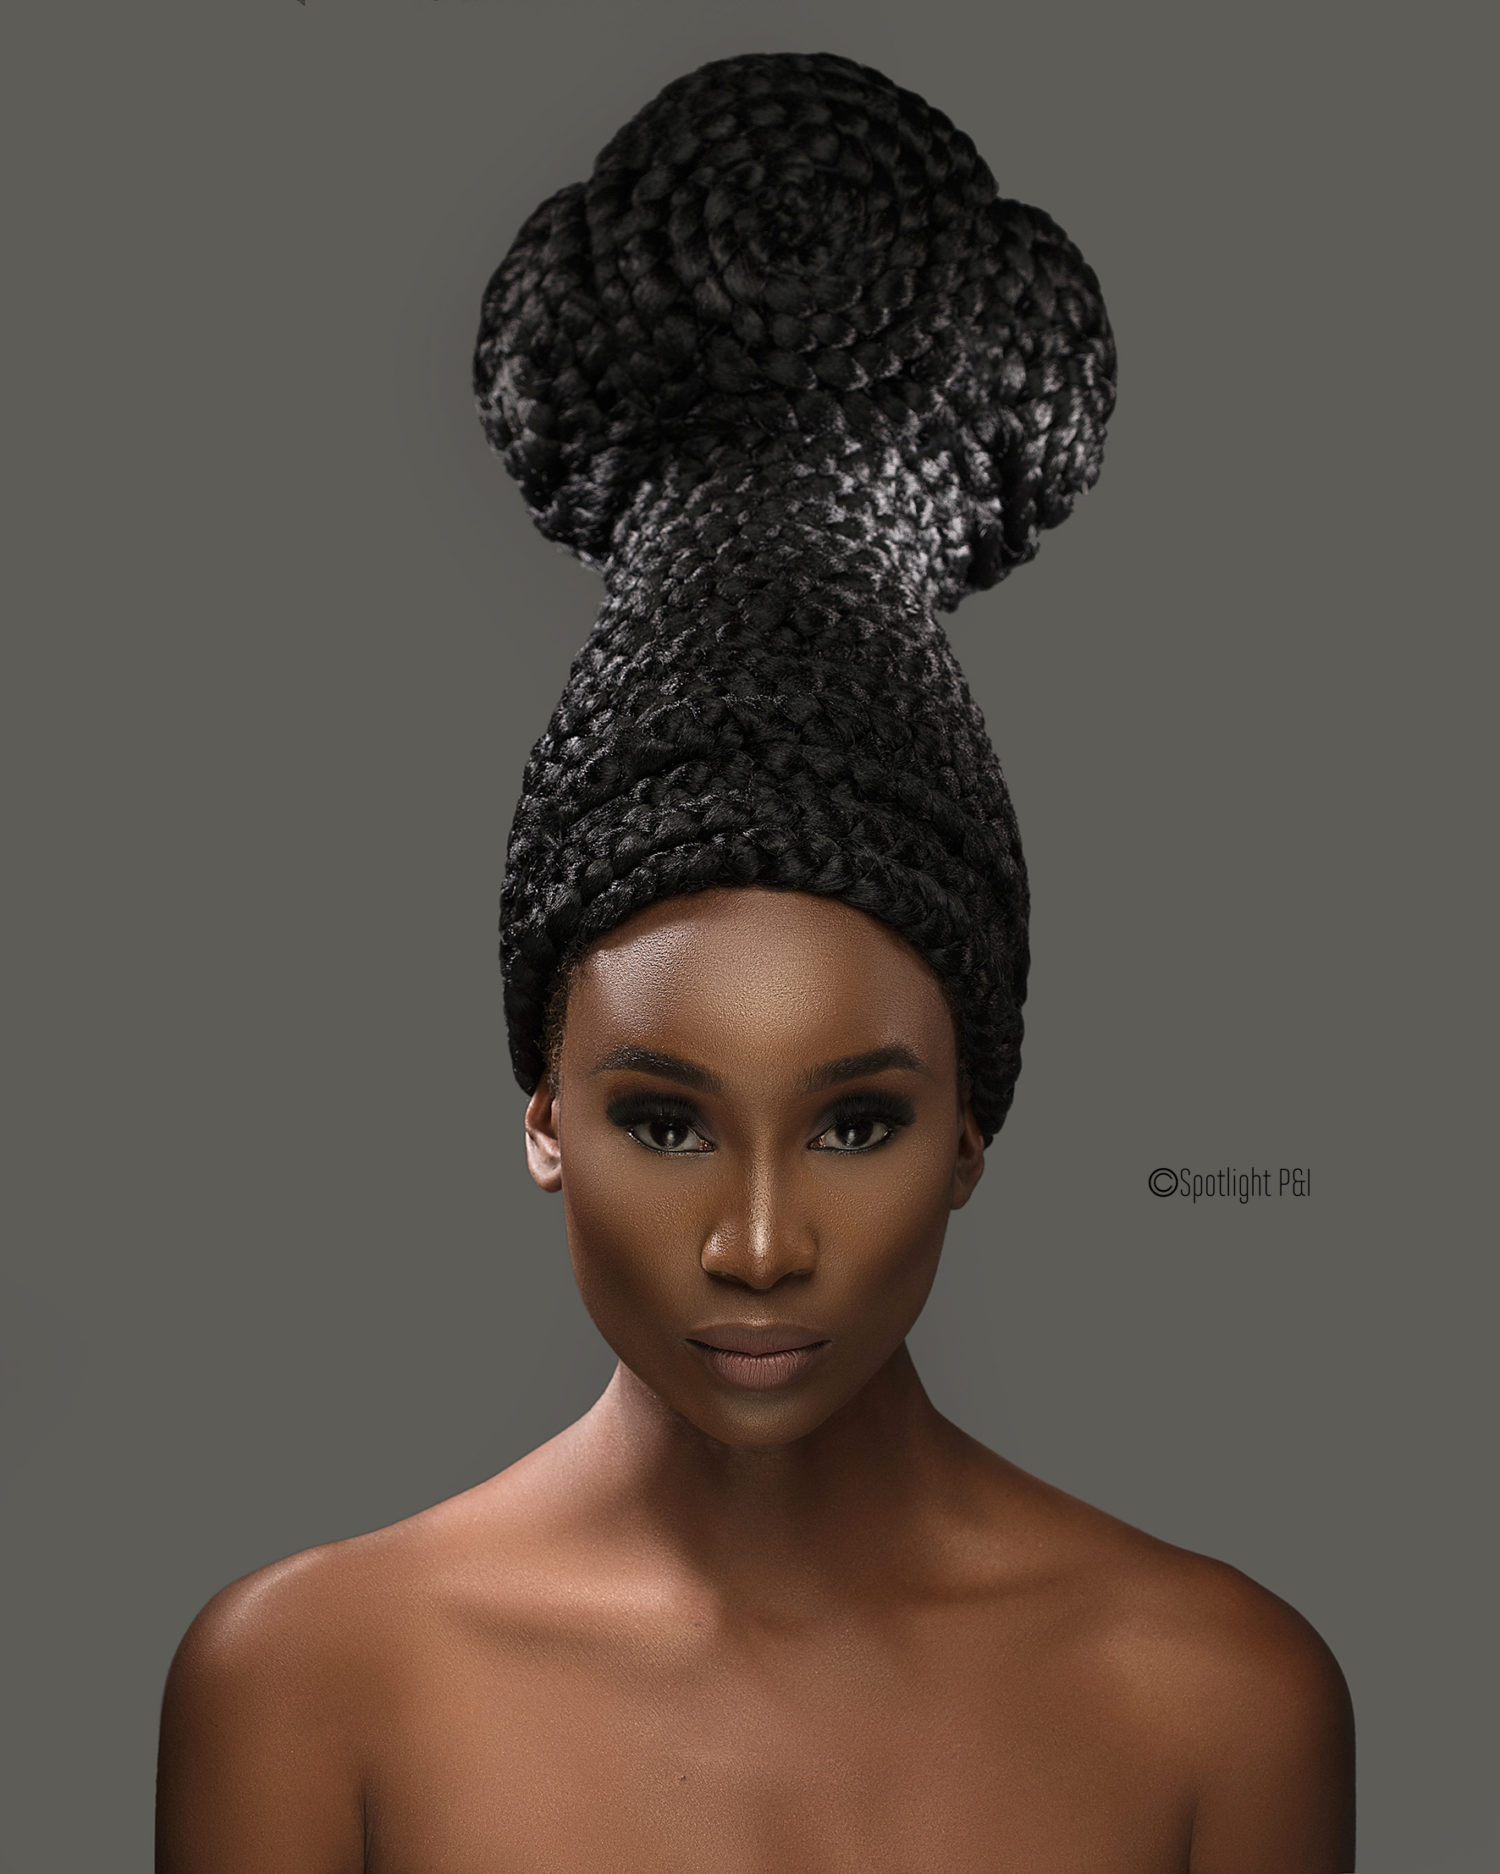 This “Hairditorial” Celebrates The Beauty of Black Hair!